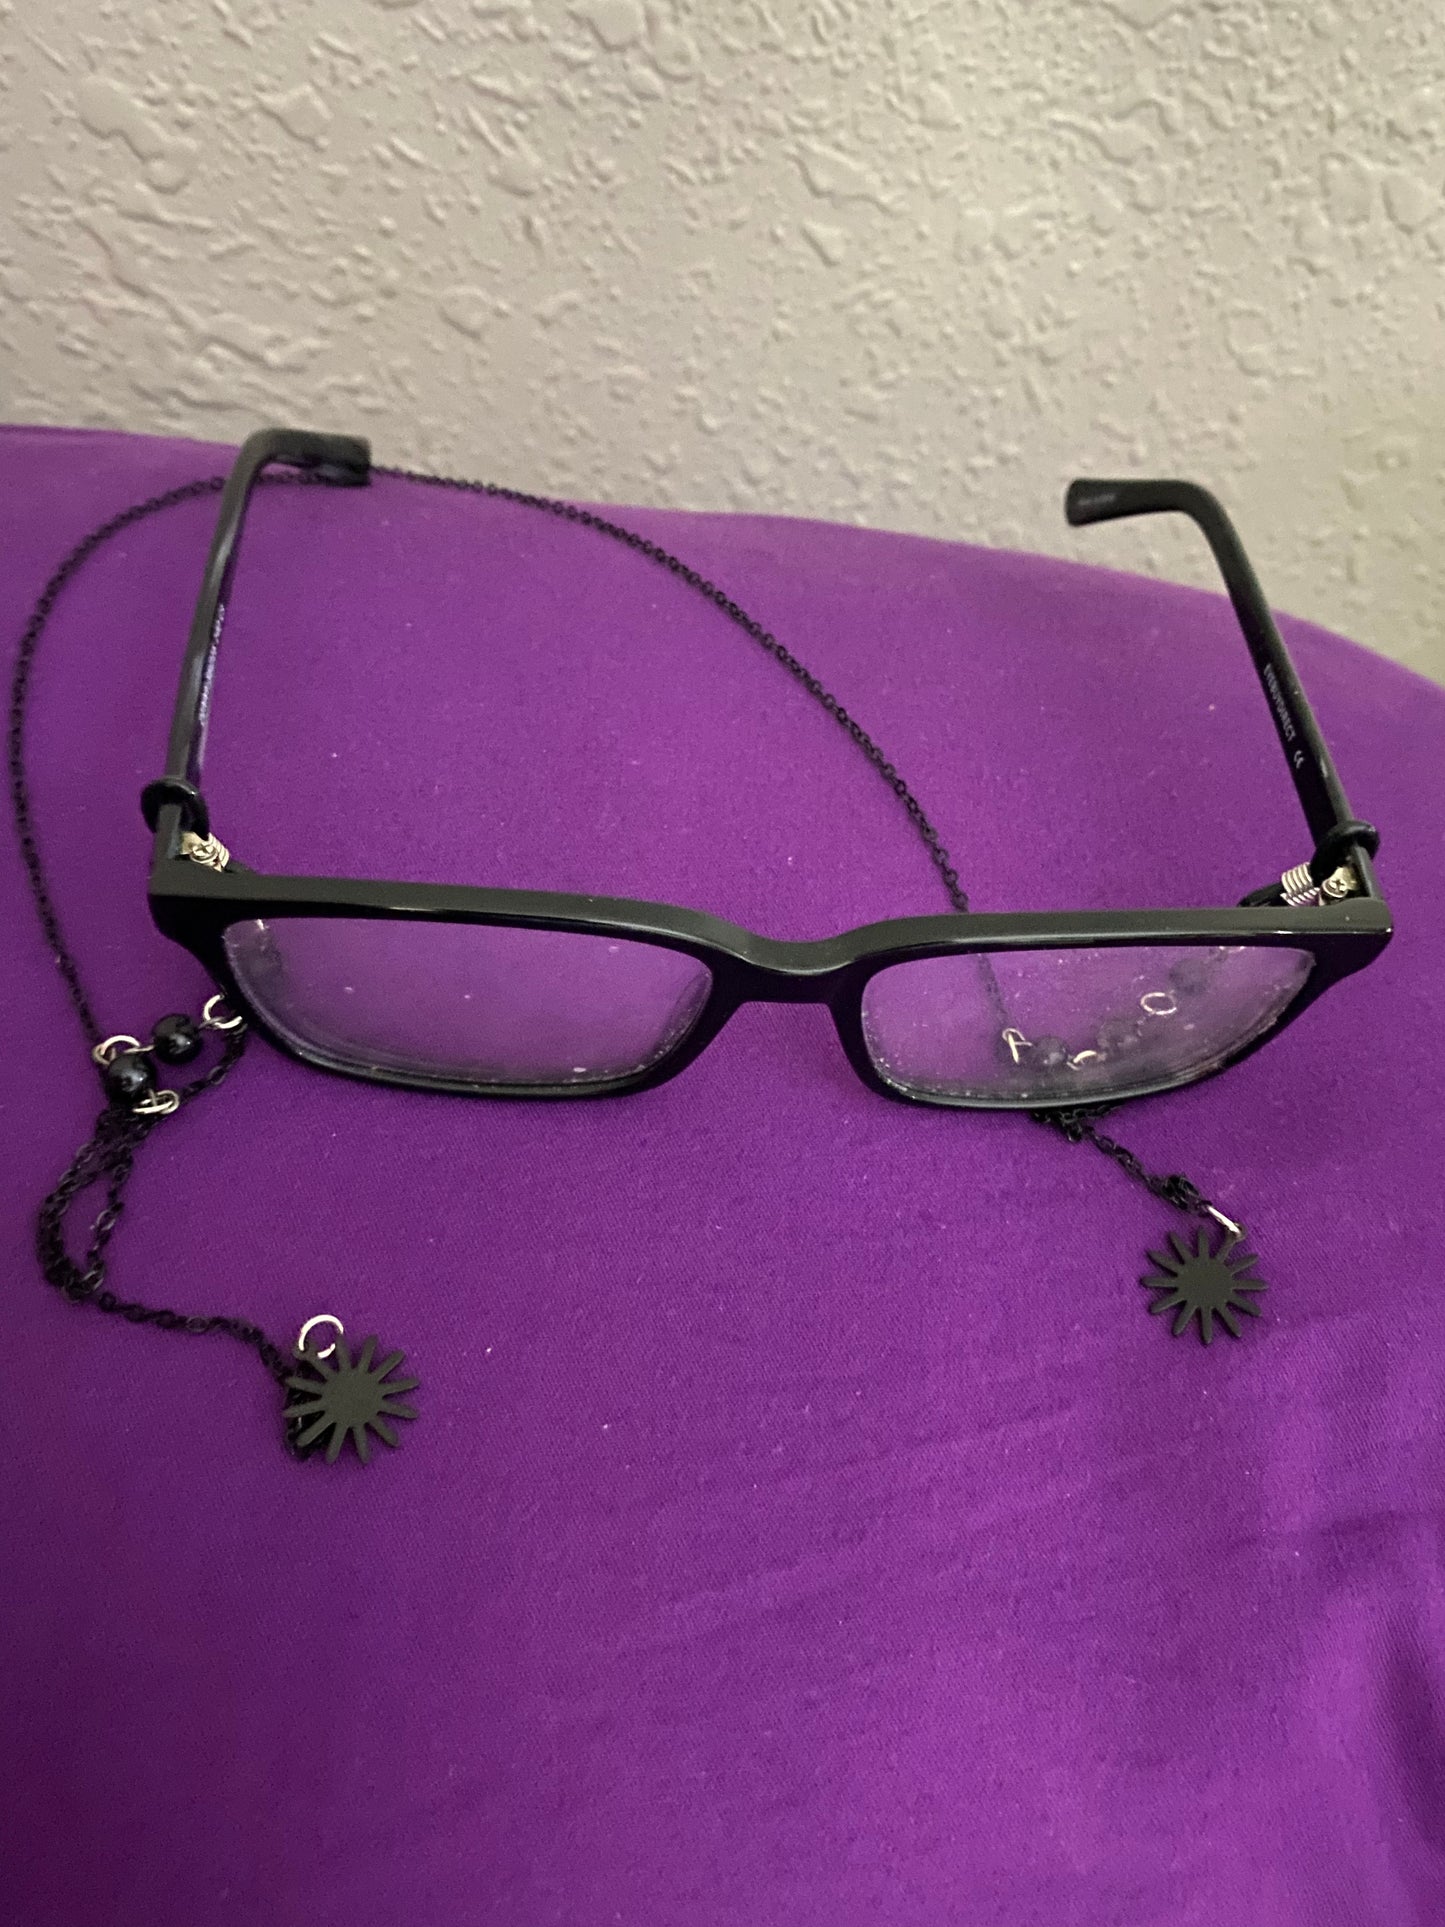 Entity Inspired Glasses Chains: The Dark